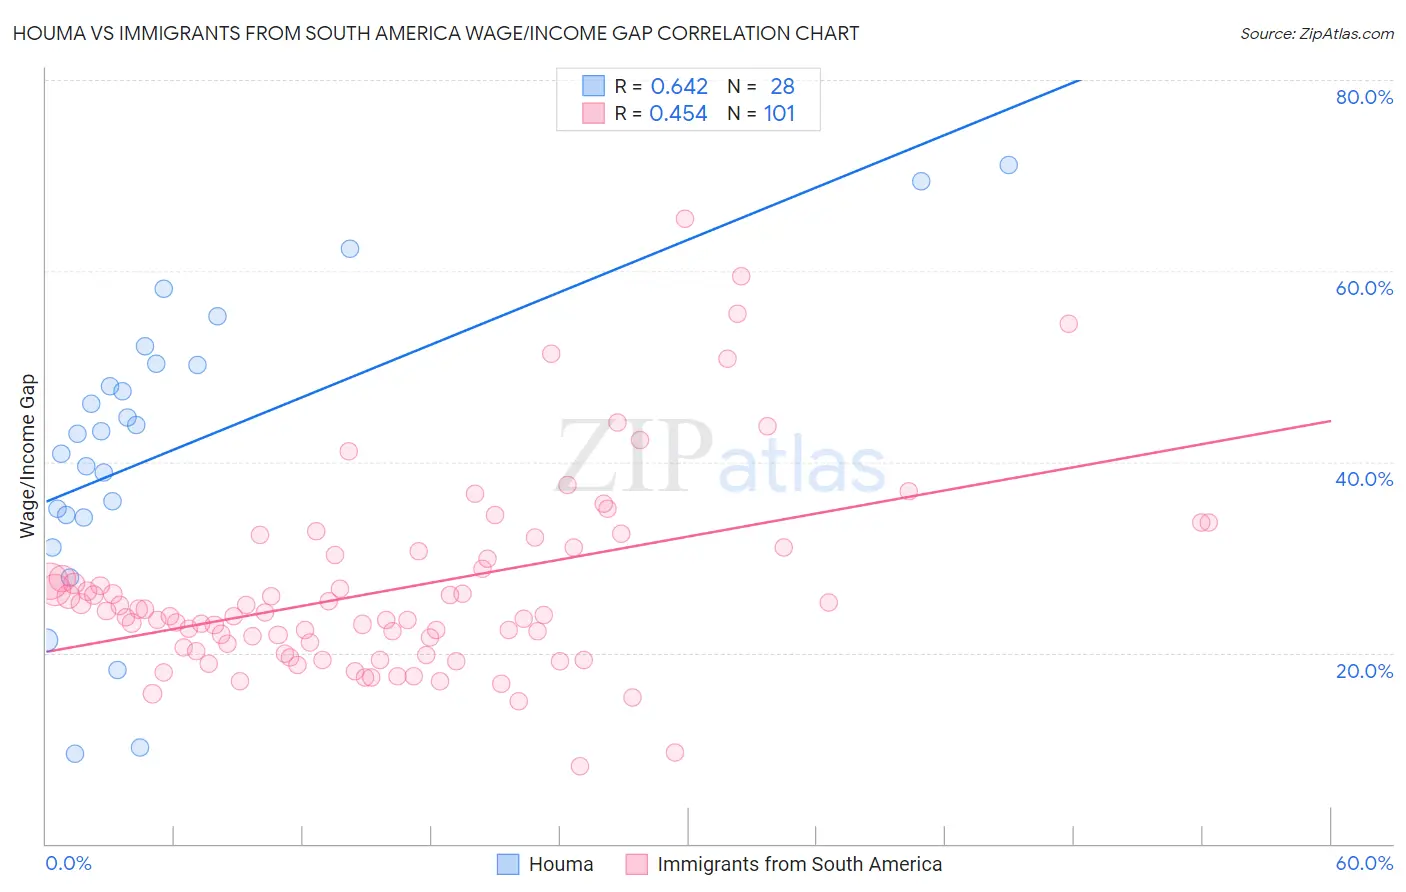 Houma vs Immigrants from South America Wage/Income Gap